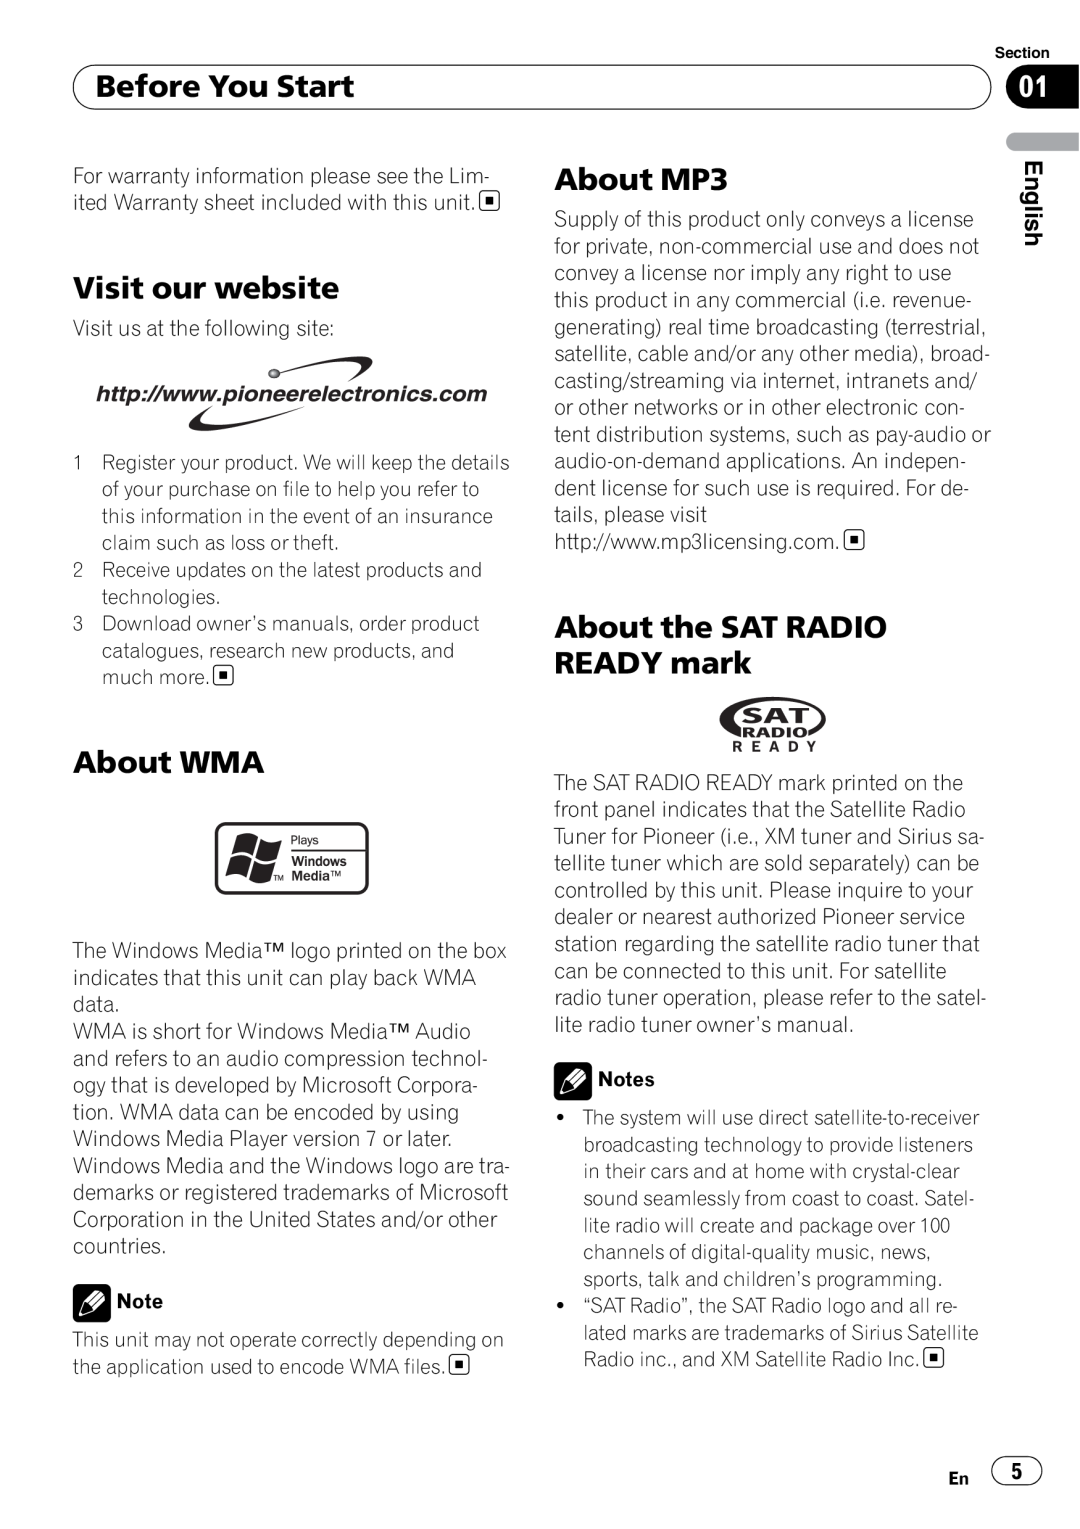 Sony DEH-P2900MP Visit our website, About WMA, About MP3, About the SAT RADIO, READY mark, Before You Start 